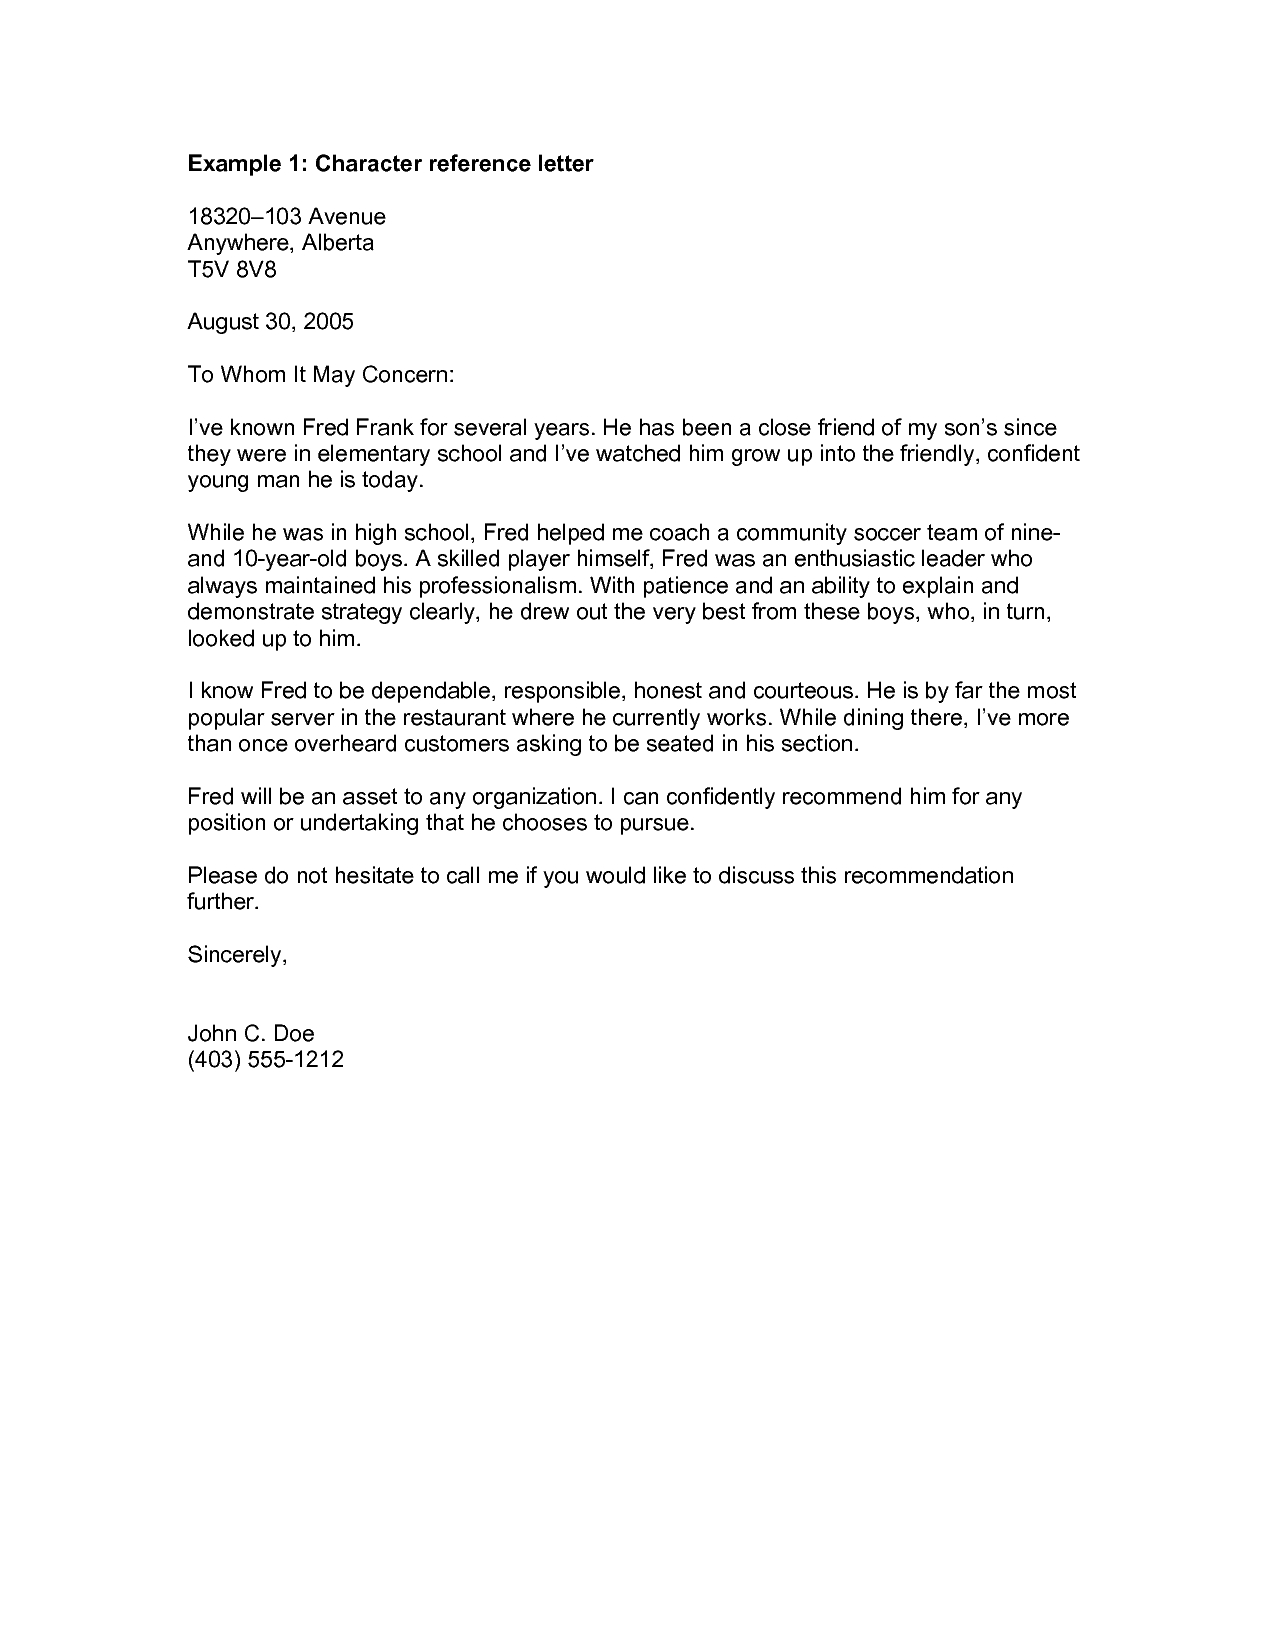 Professional Letter Of Recommendation Template - Re Mendation Letter for A Friend Template Opengovpartnersorgletter